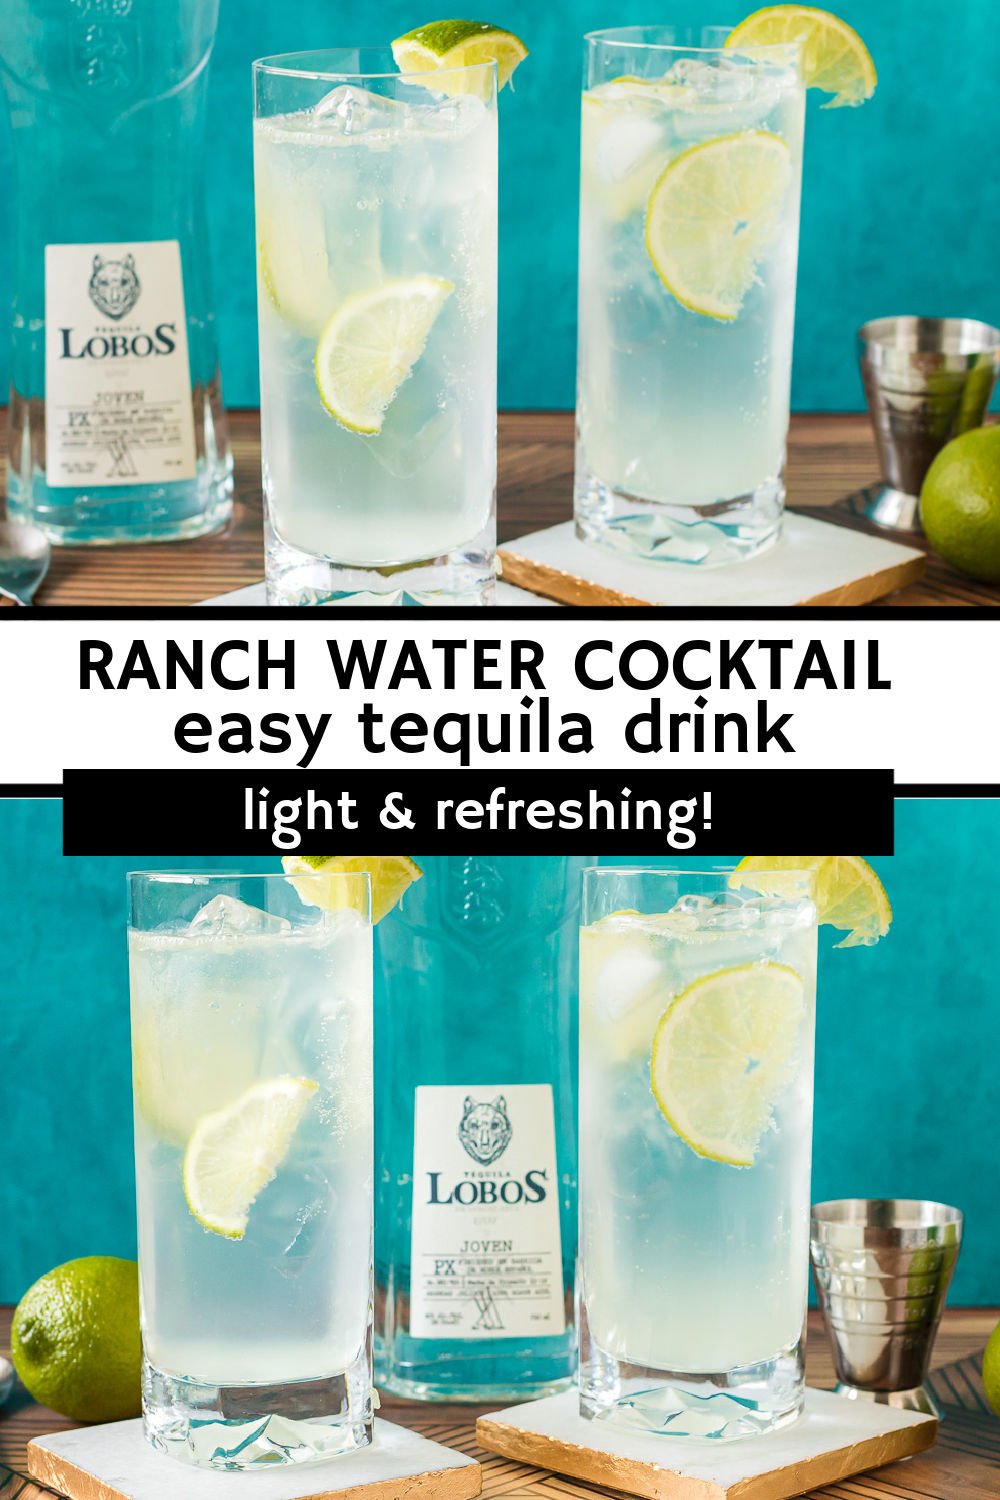 3 Ingredient Ranch Water Cocktail - earthy with sweet undertones, this top-shelf tequila cocktail recipe is paired with bubbly carbonated water and vibrant, citrusy lime. It is sure to awaken your taste buds - making this ranch water cocktail the perfect addition to any summer get-together. | www.persnicketyplates.com